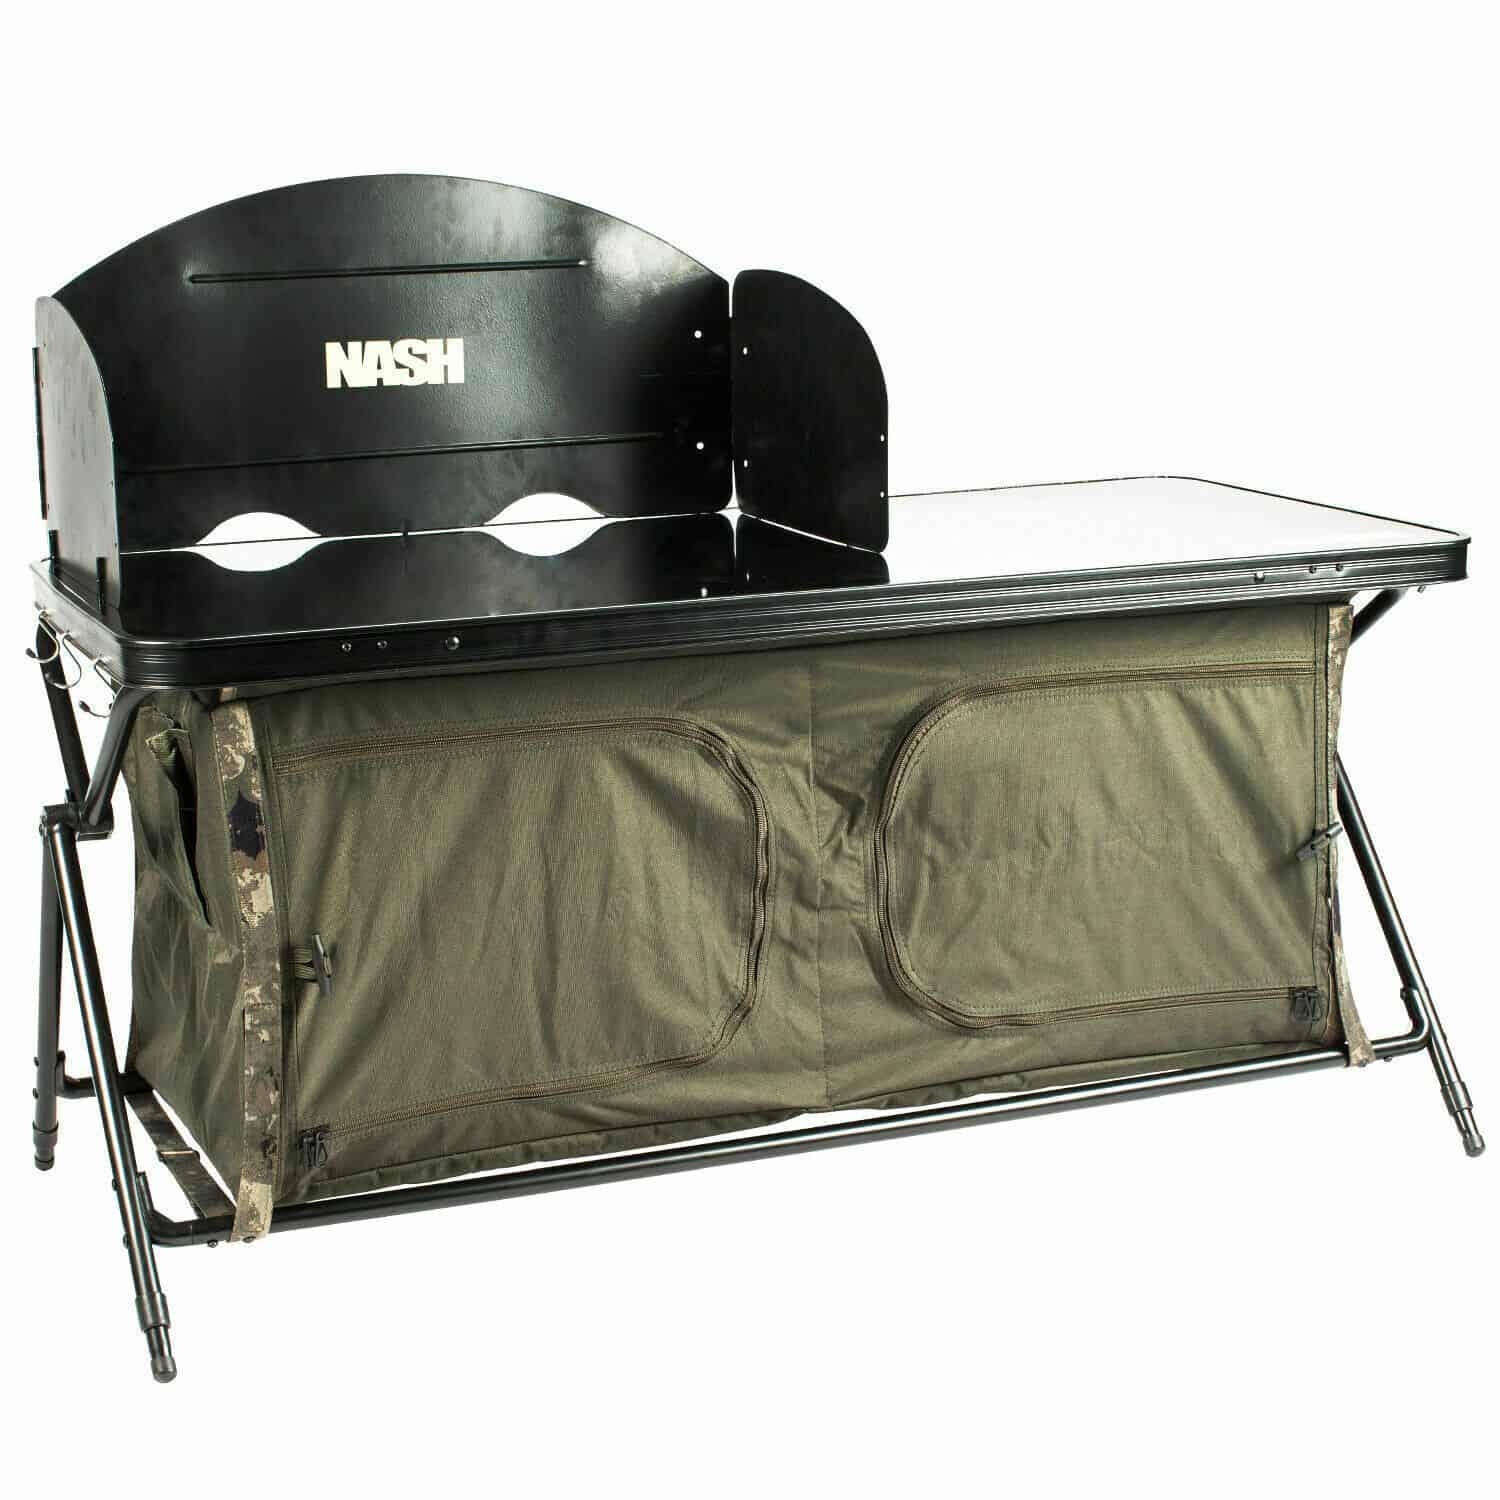 https://www.c2kft.co.uk/wp-content/uploads/imported/1/Nash-Bank-Life-Cook-Station-NEW-Carp-Fishing-Cooking-Equipment-T1221-174198315711.JPG